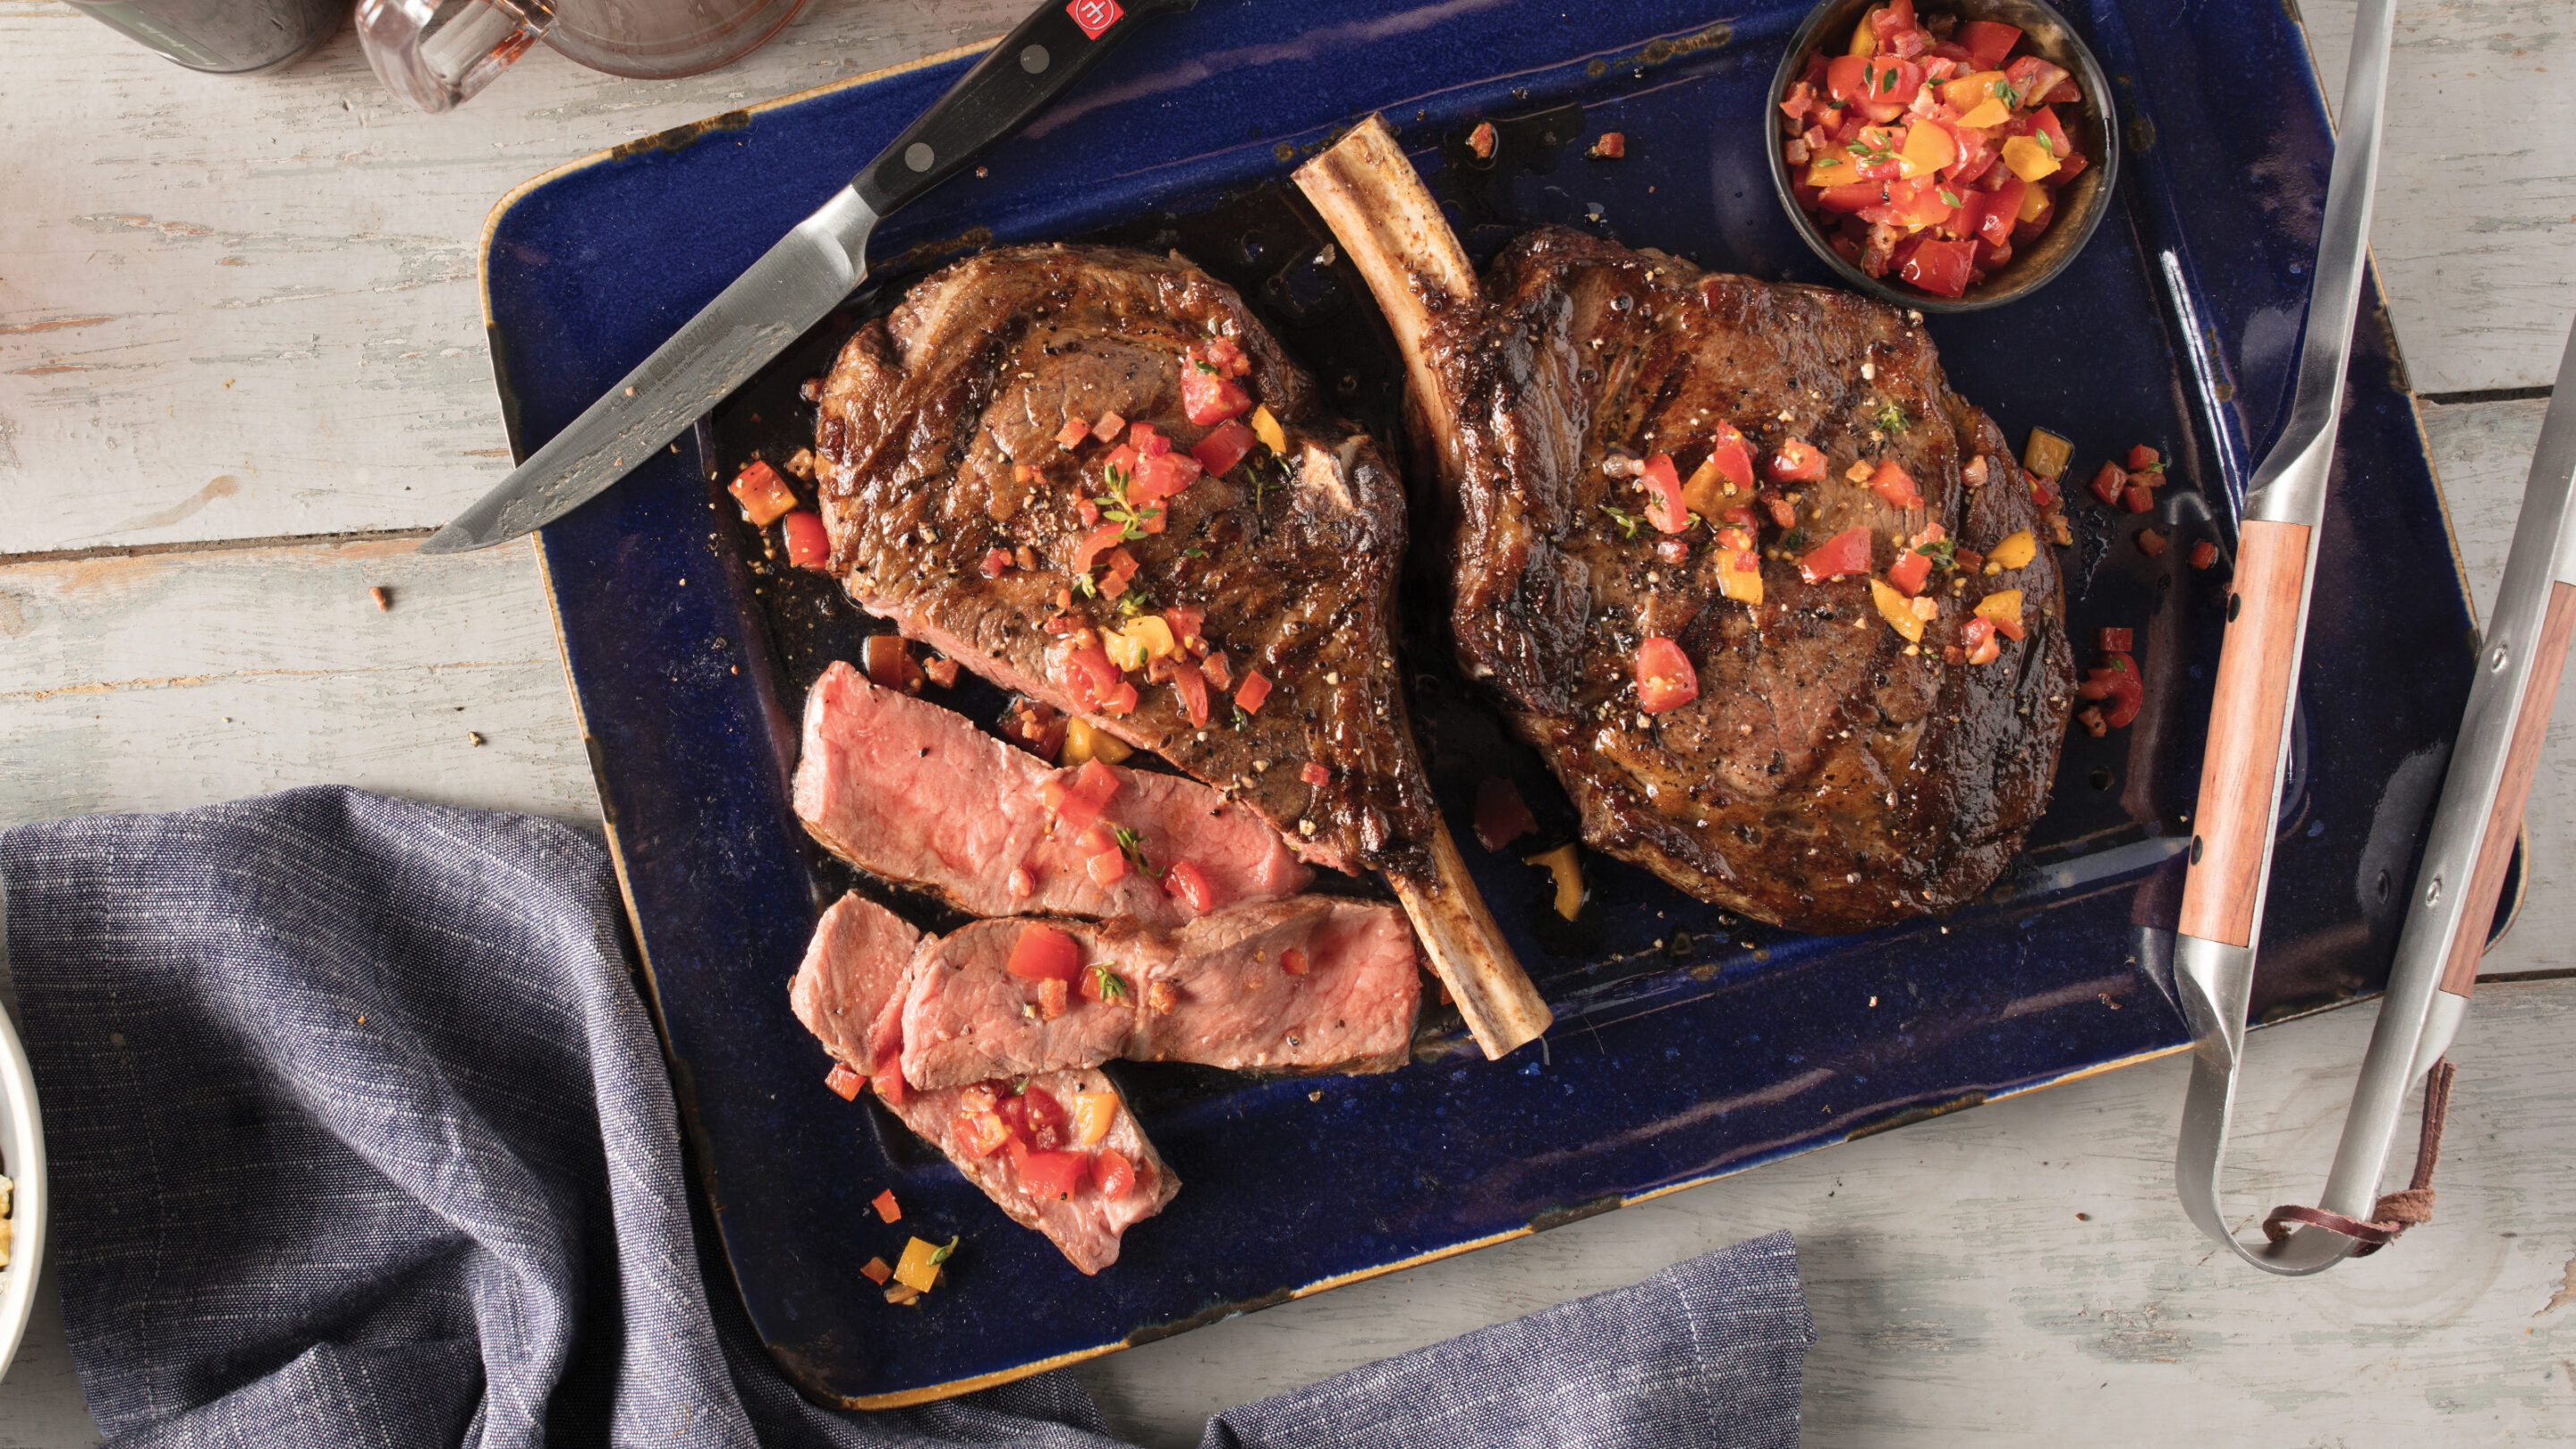 https://blog-content.omahasteaks.com/wp-content/uploads/2022/06/blogwp_smoking-steak-a-how-to-guide-scaled-1.jpg